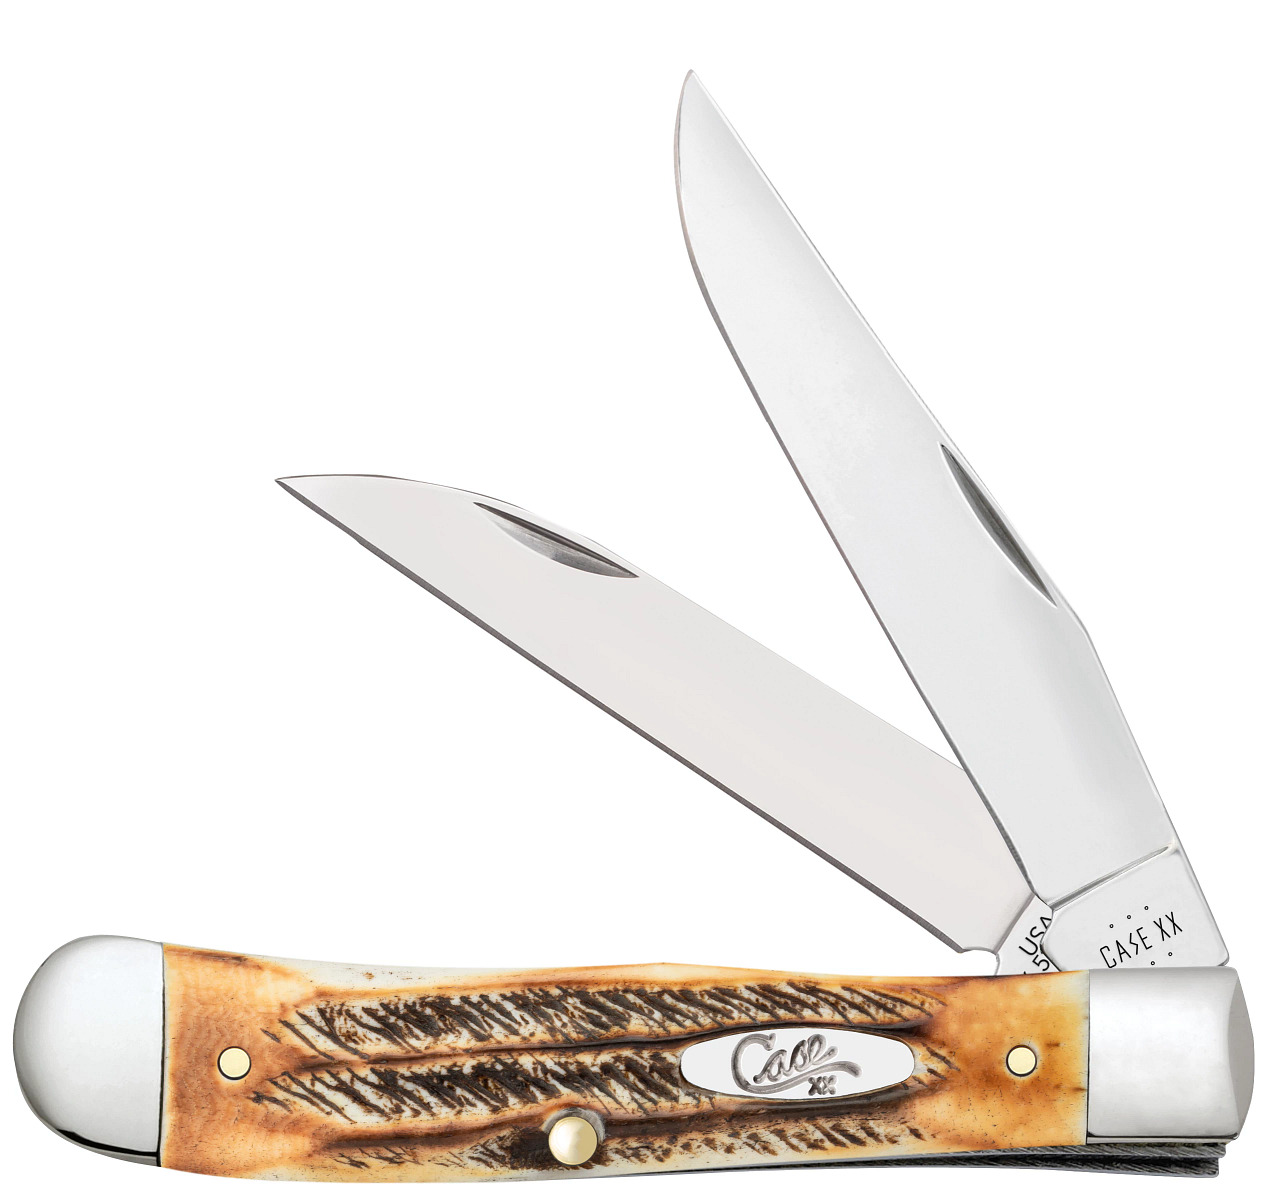 Case xx Knives Wharncliffe Trapper 6.5 BoneStag 65329 Pocket Knife Stainless